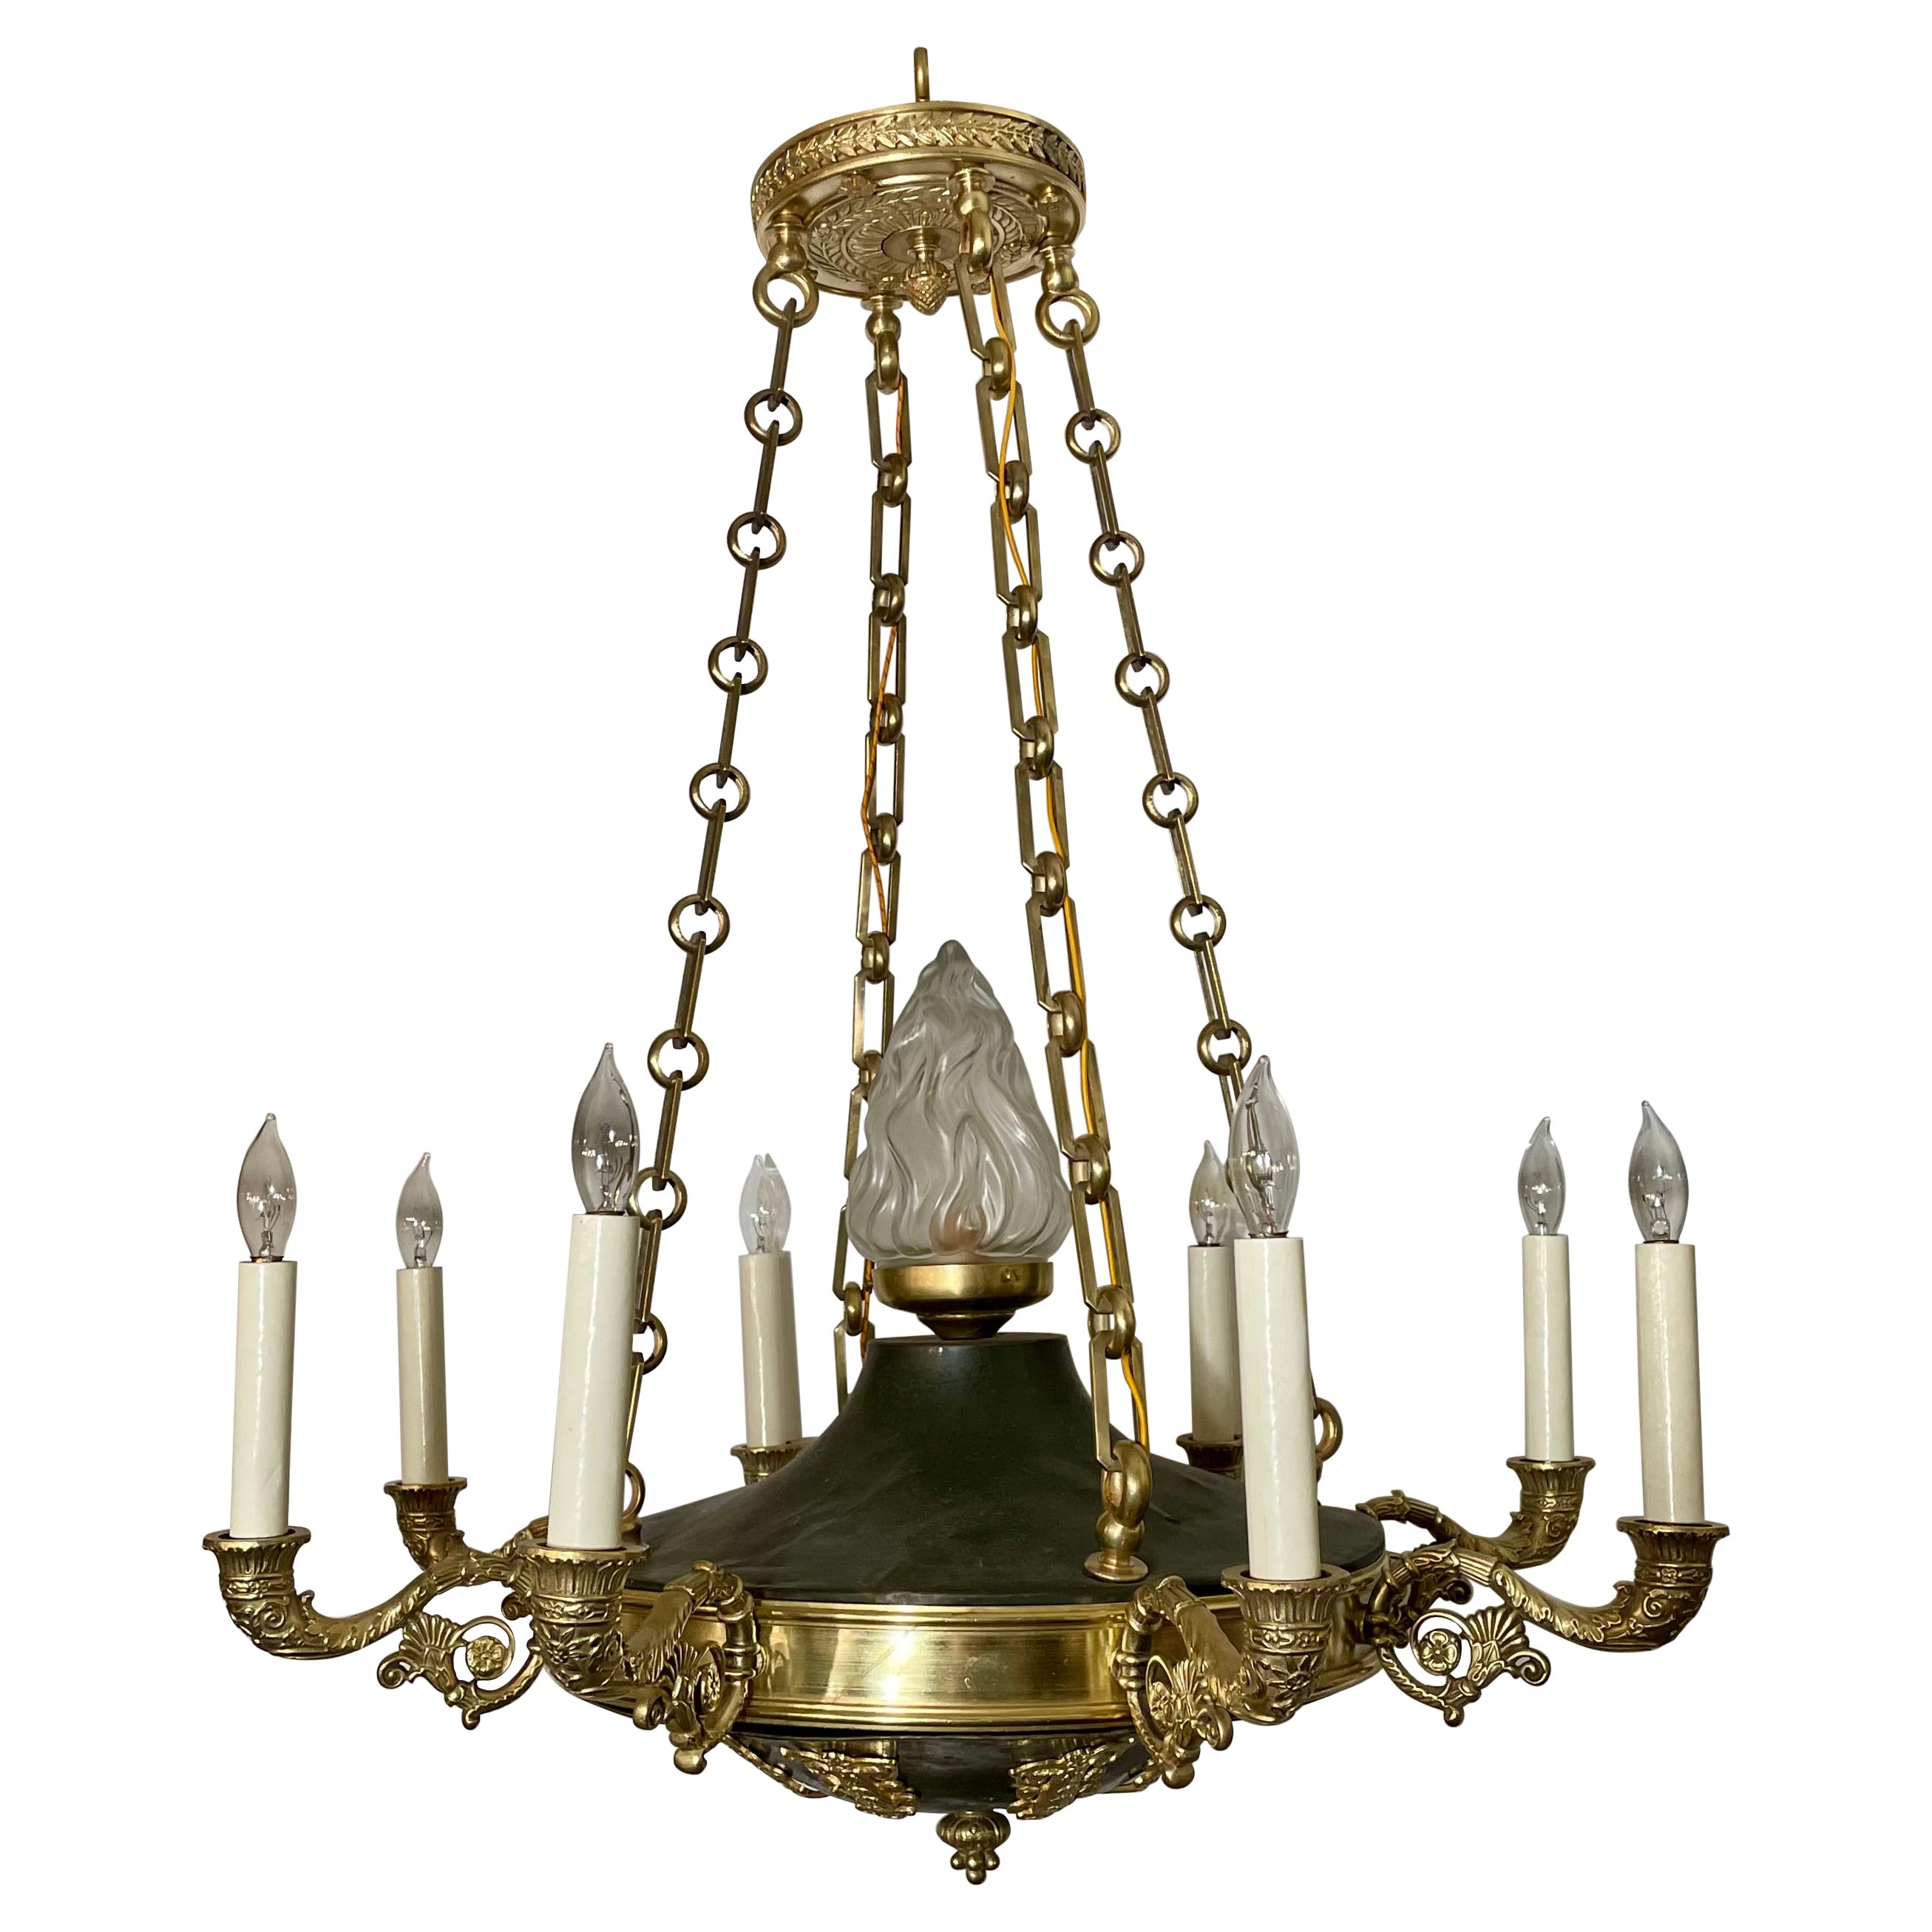 Antiquity French Empire Chandelier circa 1900